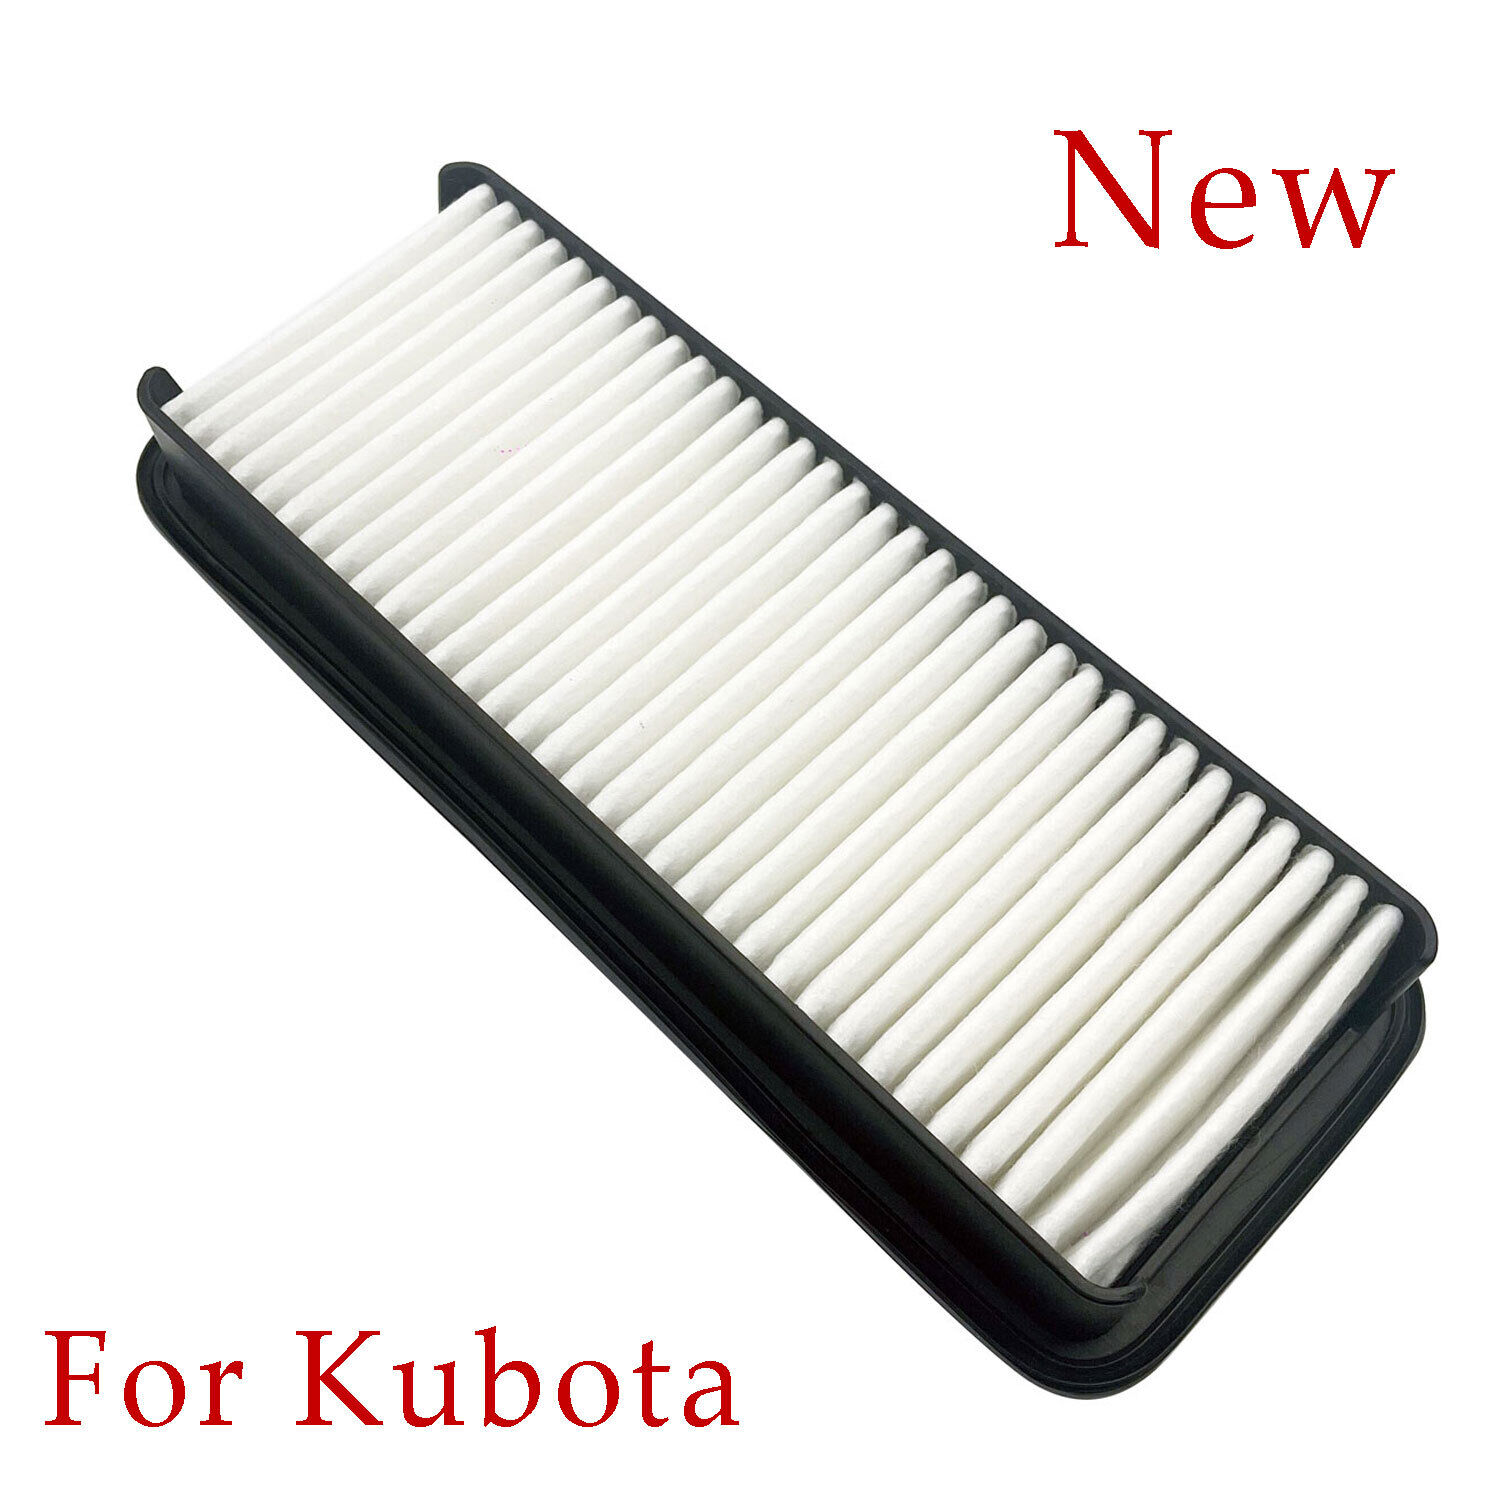 Fit for Kubota 6A671-75090 014520-0804 T1855-71600 Cabin Air Filter Kit US-stock